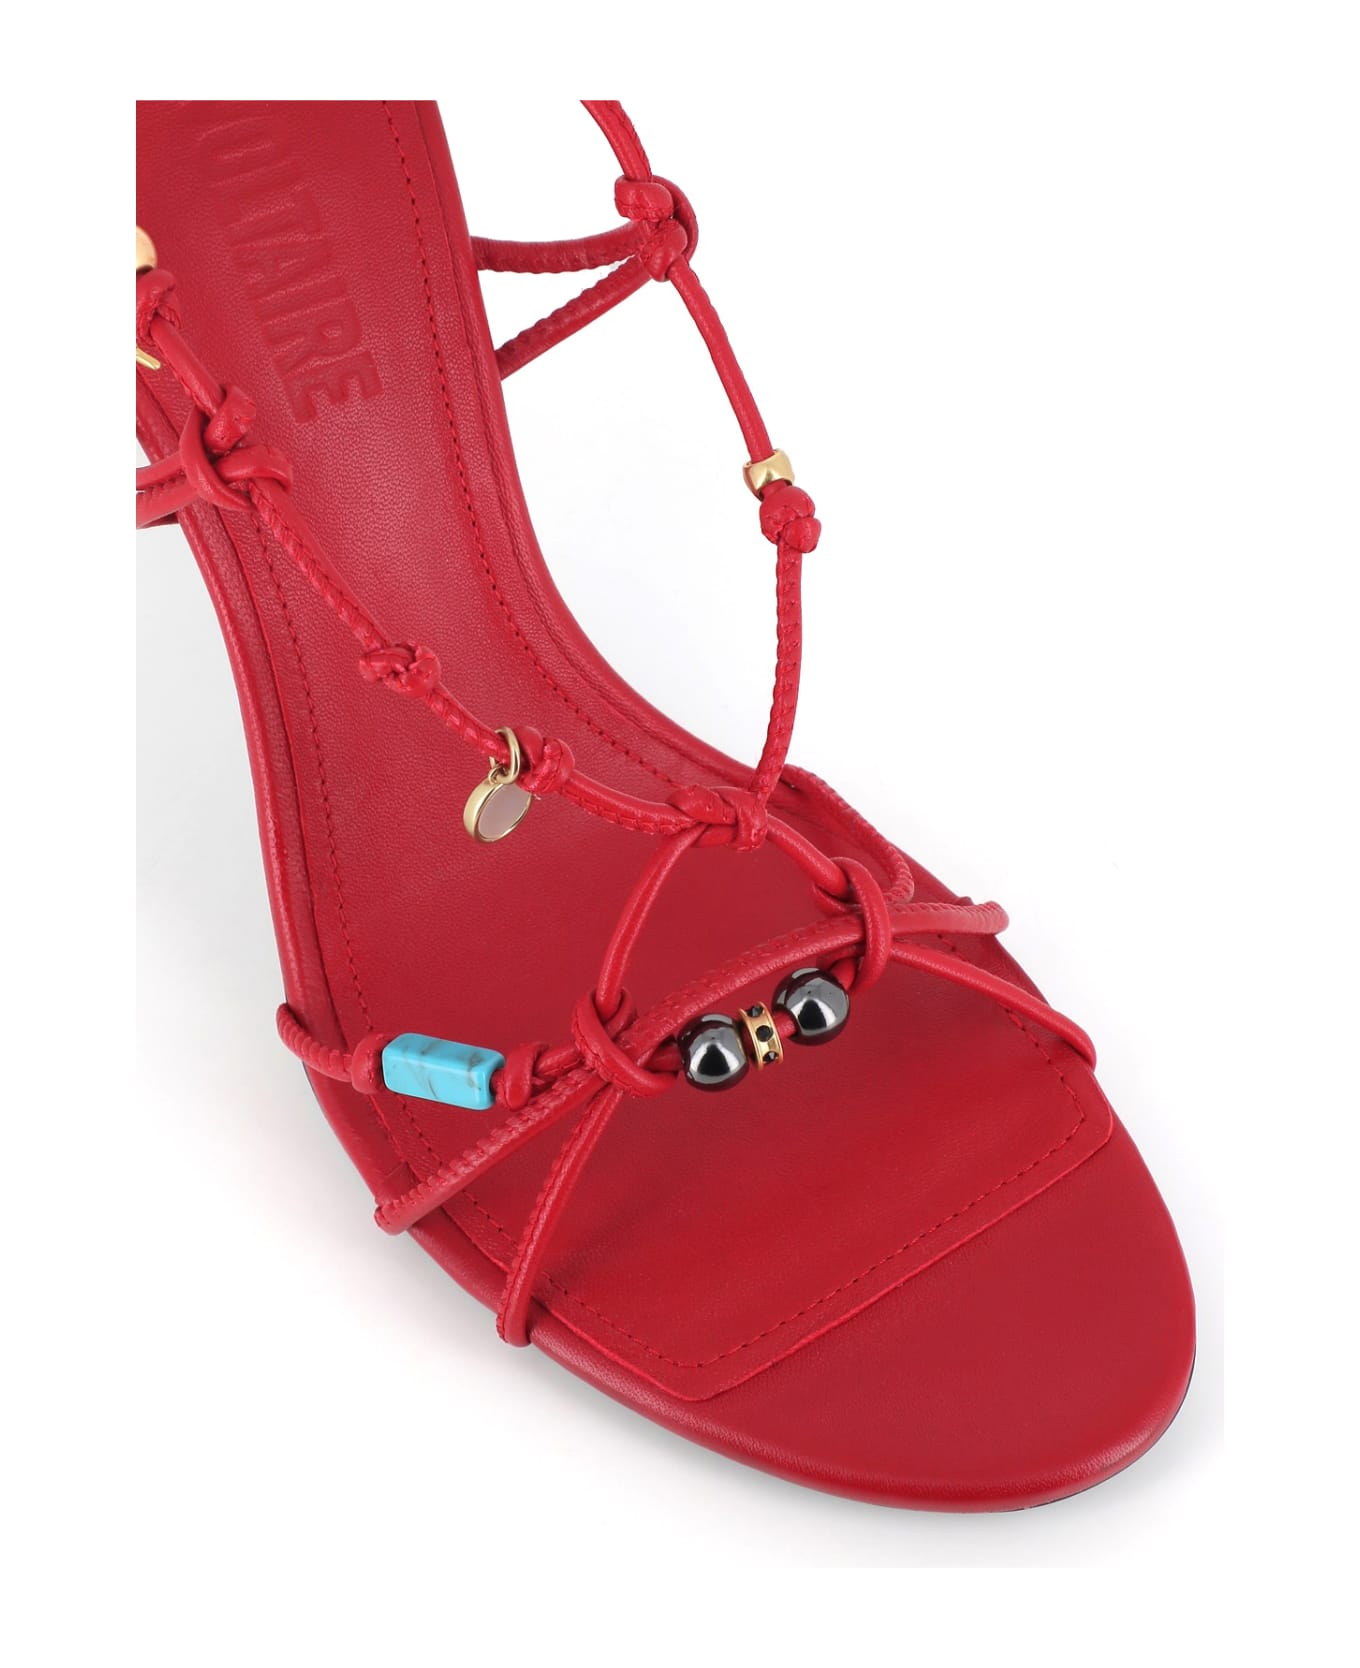 Zadig & Voltaire Sandal Alana - Red サンダル